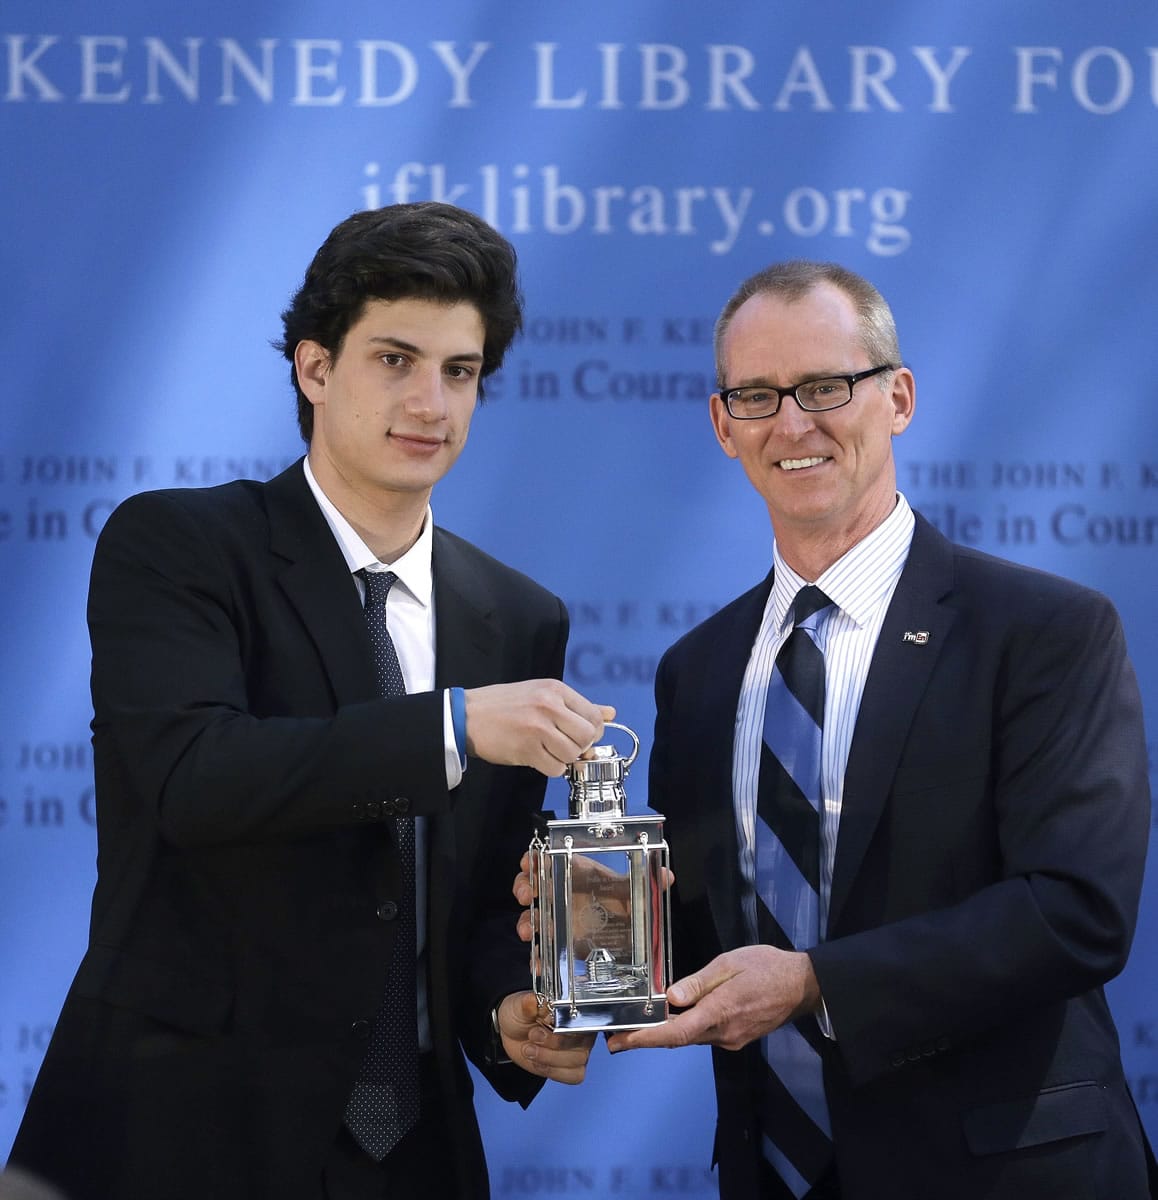 Jack Schlossberg, left, grandson of President John F. Kennedy, presents former U.S. Rep. Bob Inglis, R-S.C., with the 2015 Profile in Courage Award on Sunday at the John F. Kennedy Library and Museum in Boston.